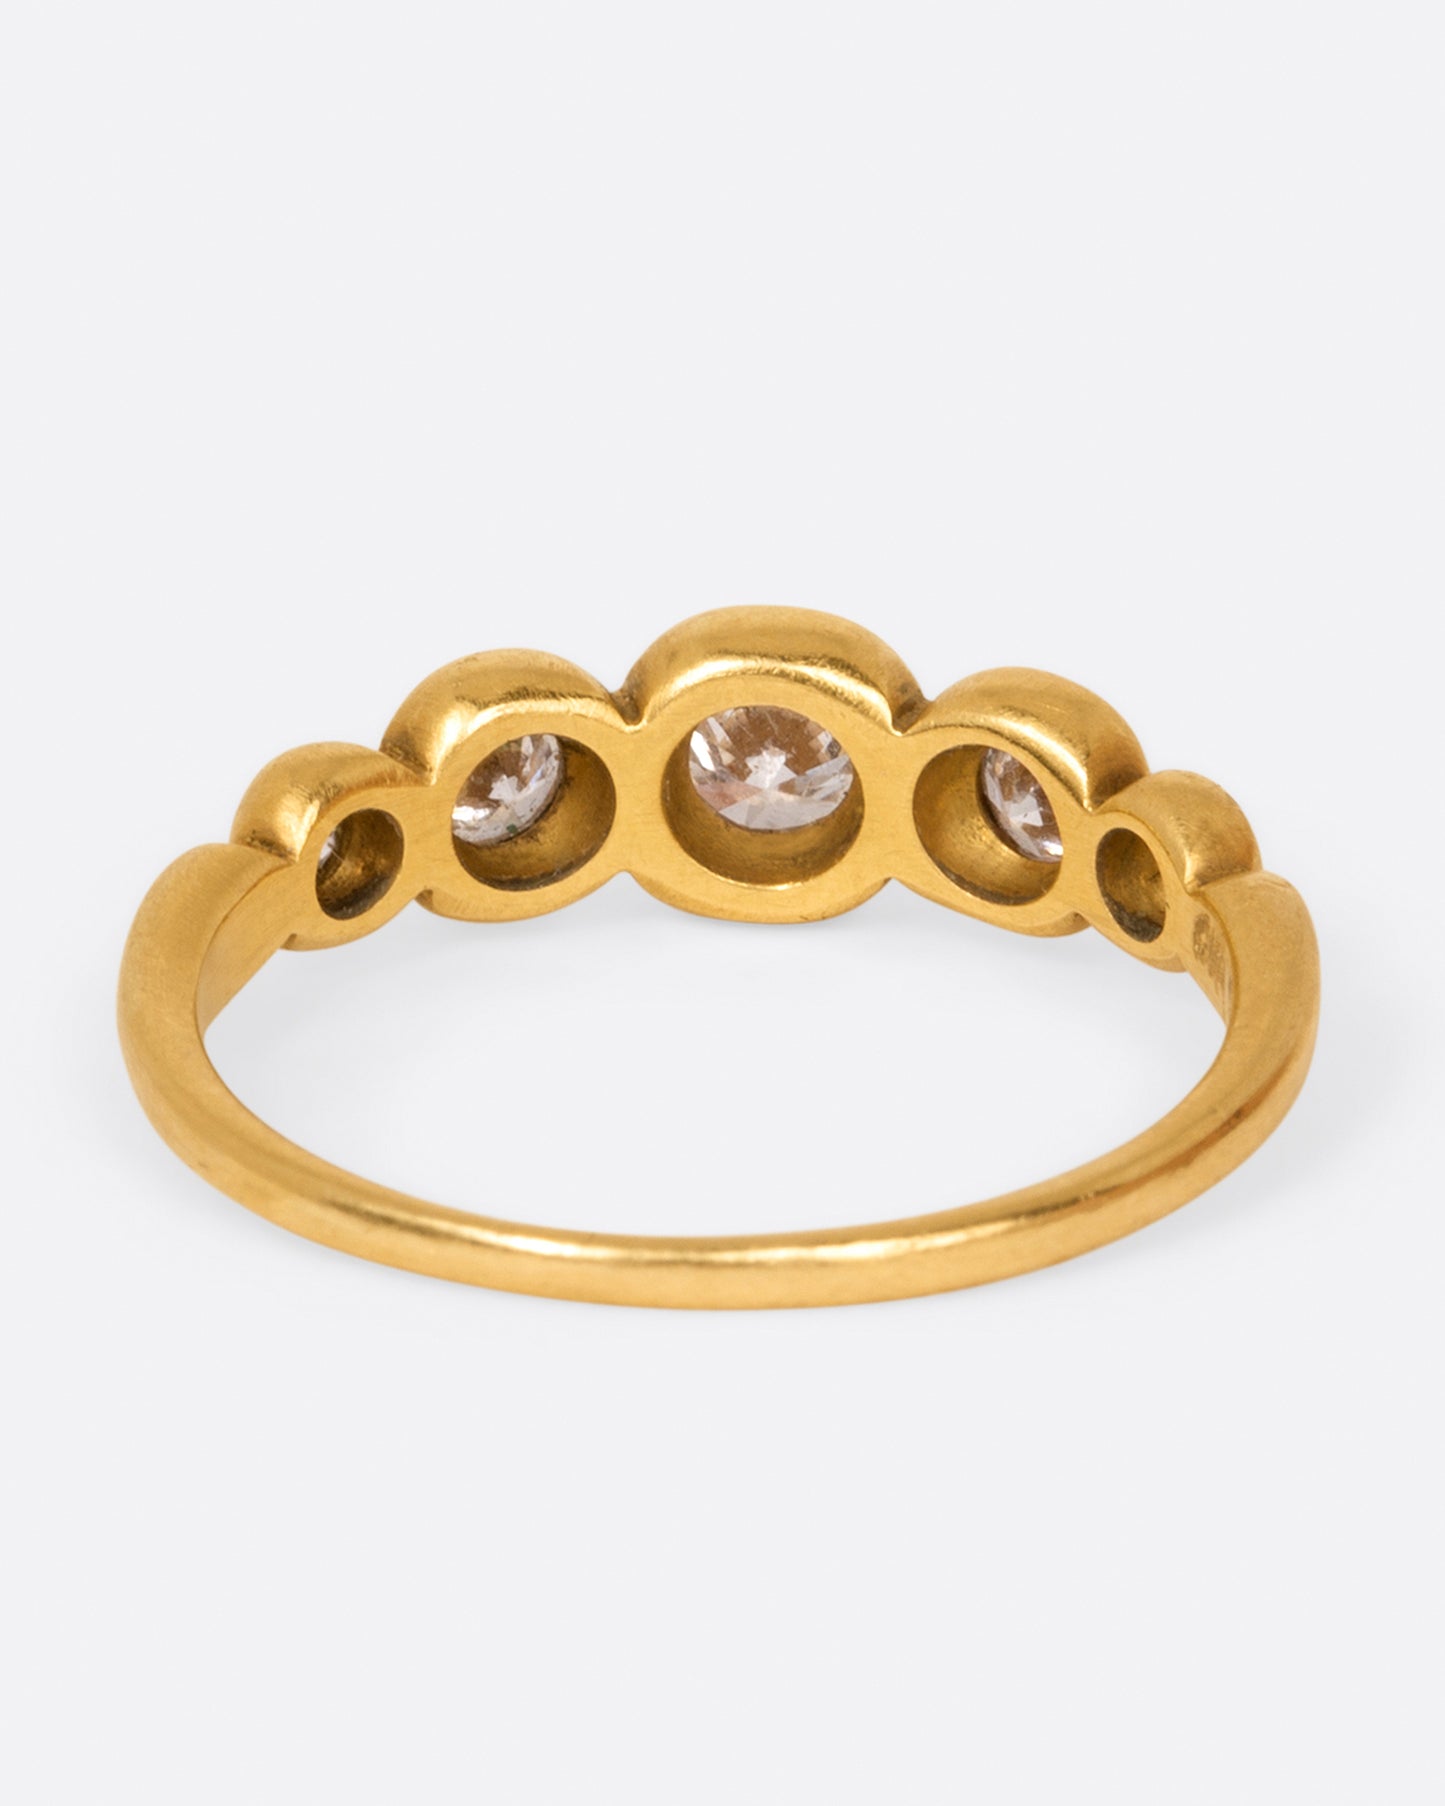 A brushed gold ring with five round white diamonds in graduated sizes, shown from the back.